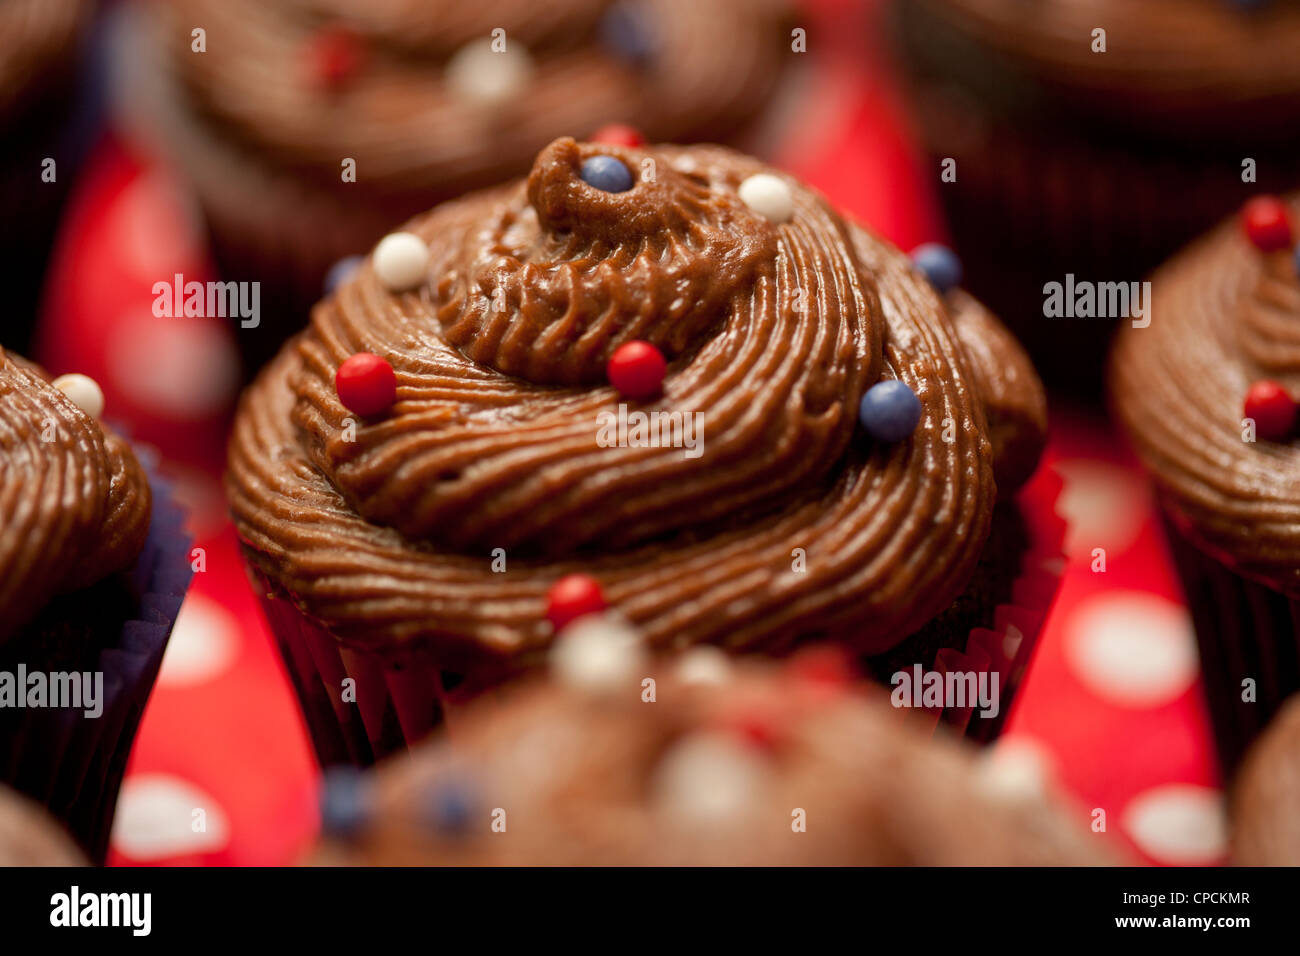 Chocolate piped icing with sugar balls on small cakes Stock Photo